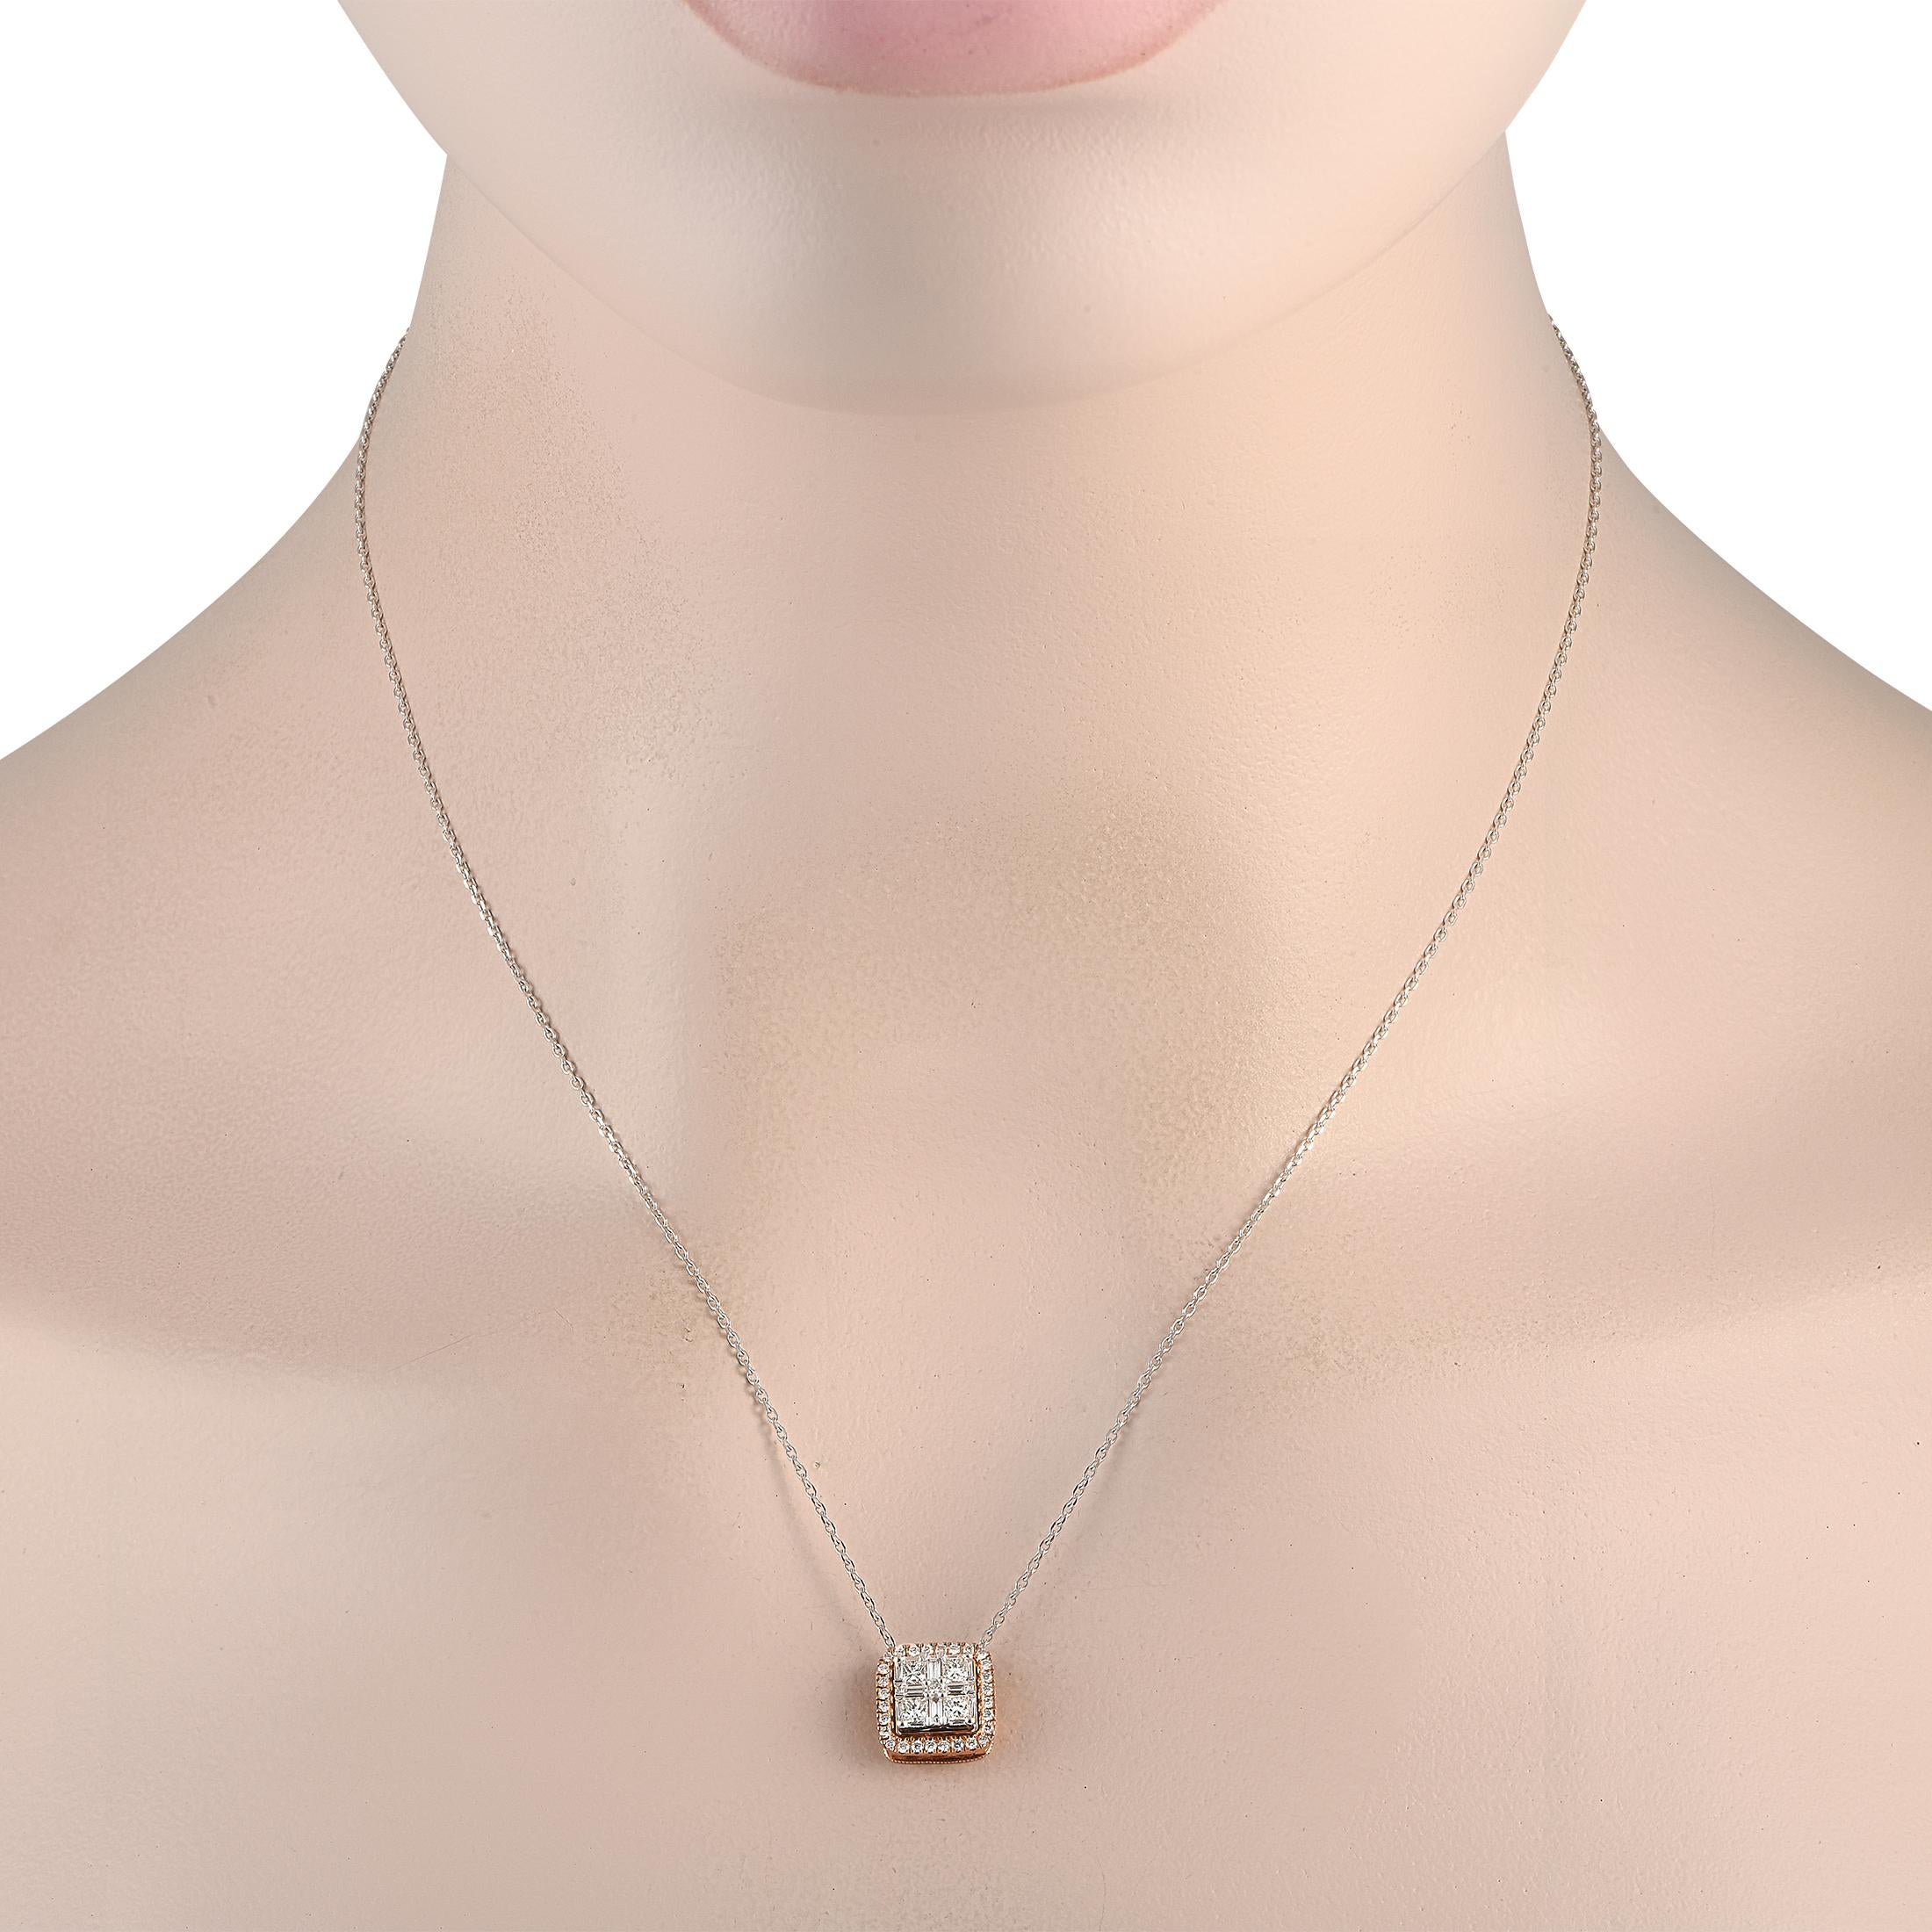 You can wear this LB Exclusive necklace to add a bit of glitter to your style. It has an 18 white gold chain holding a rounded square rose gold pendant, with a single row of diamonds tracing the edges. Although the pendant is petite in size, it has